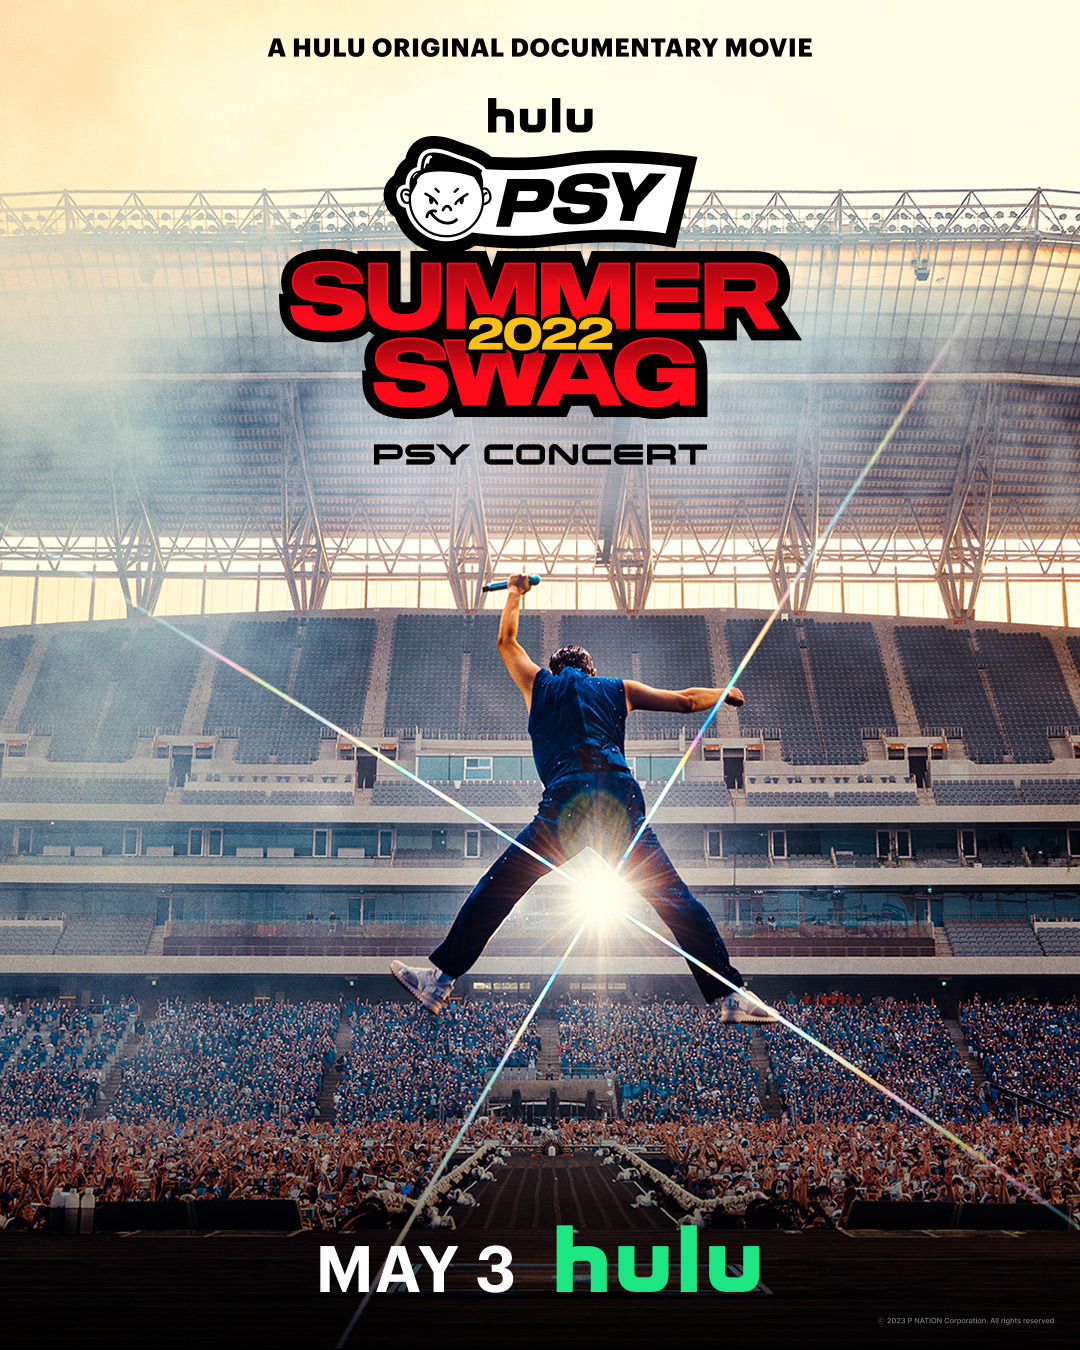 Extra Large TV Poster Image for PSY Summer Swag 2022 